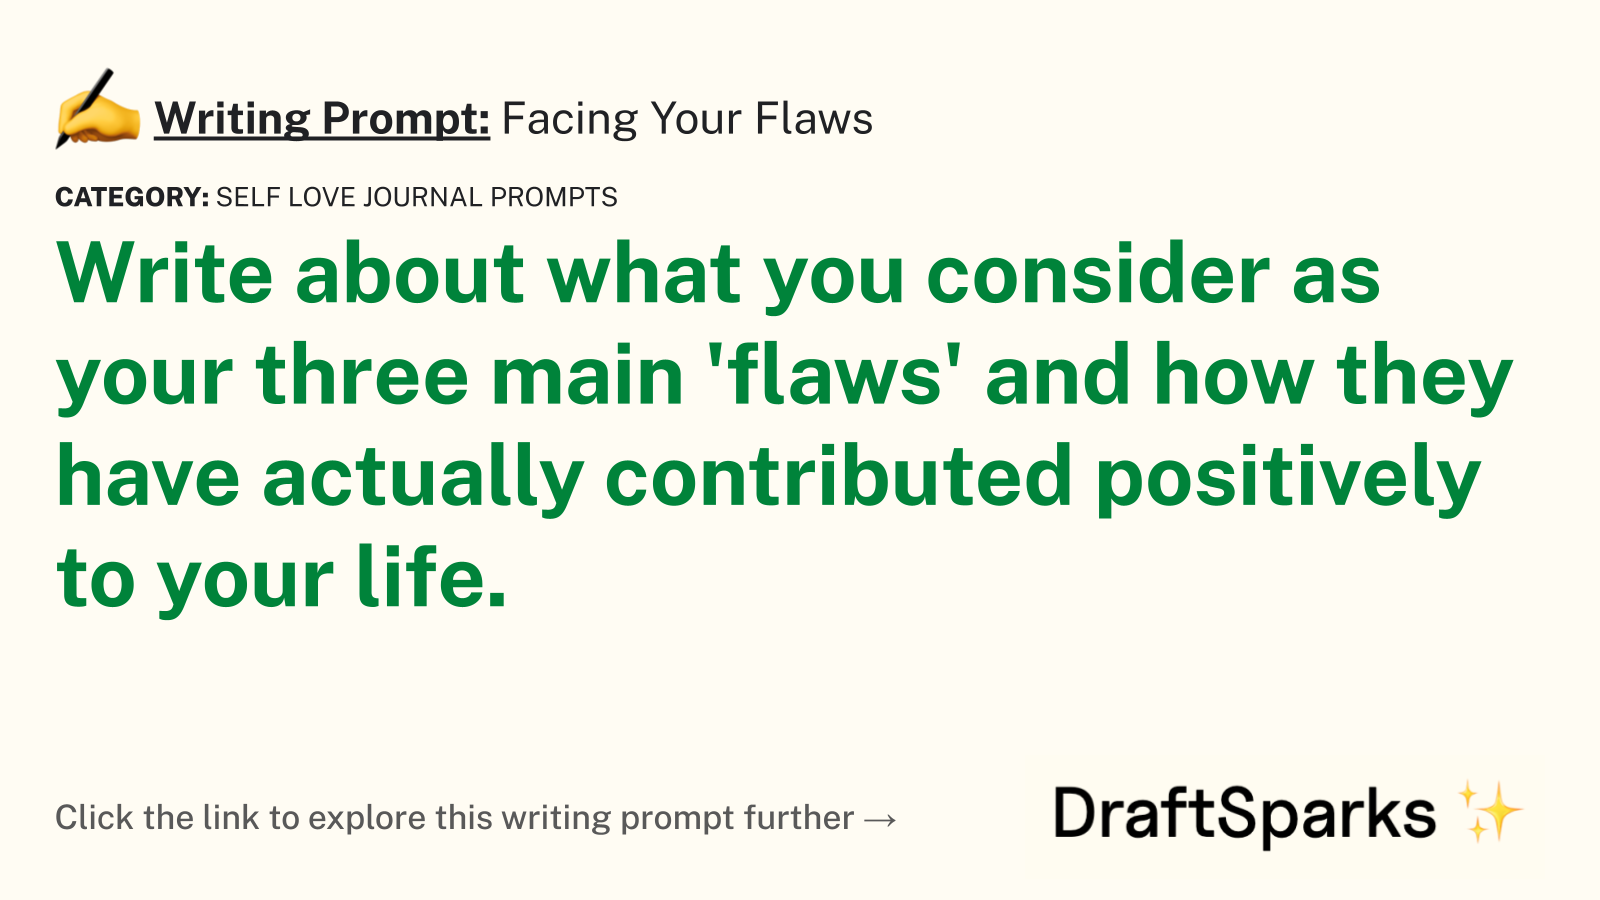 Facing Your Flaws